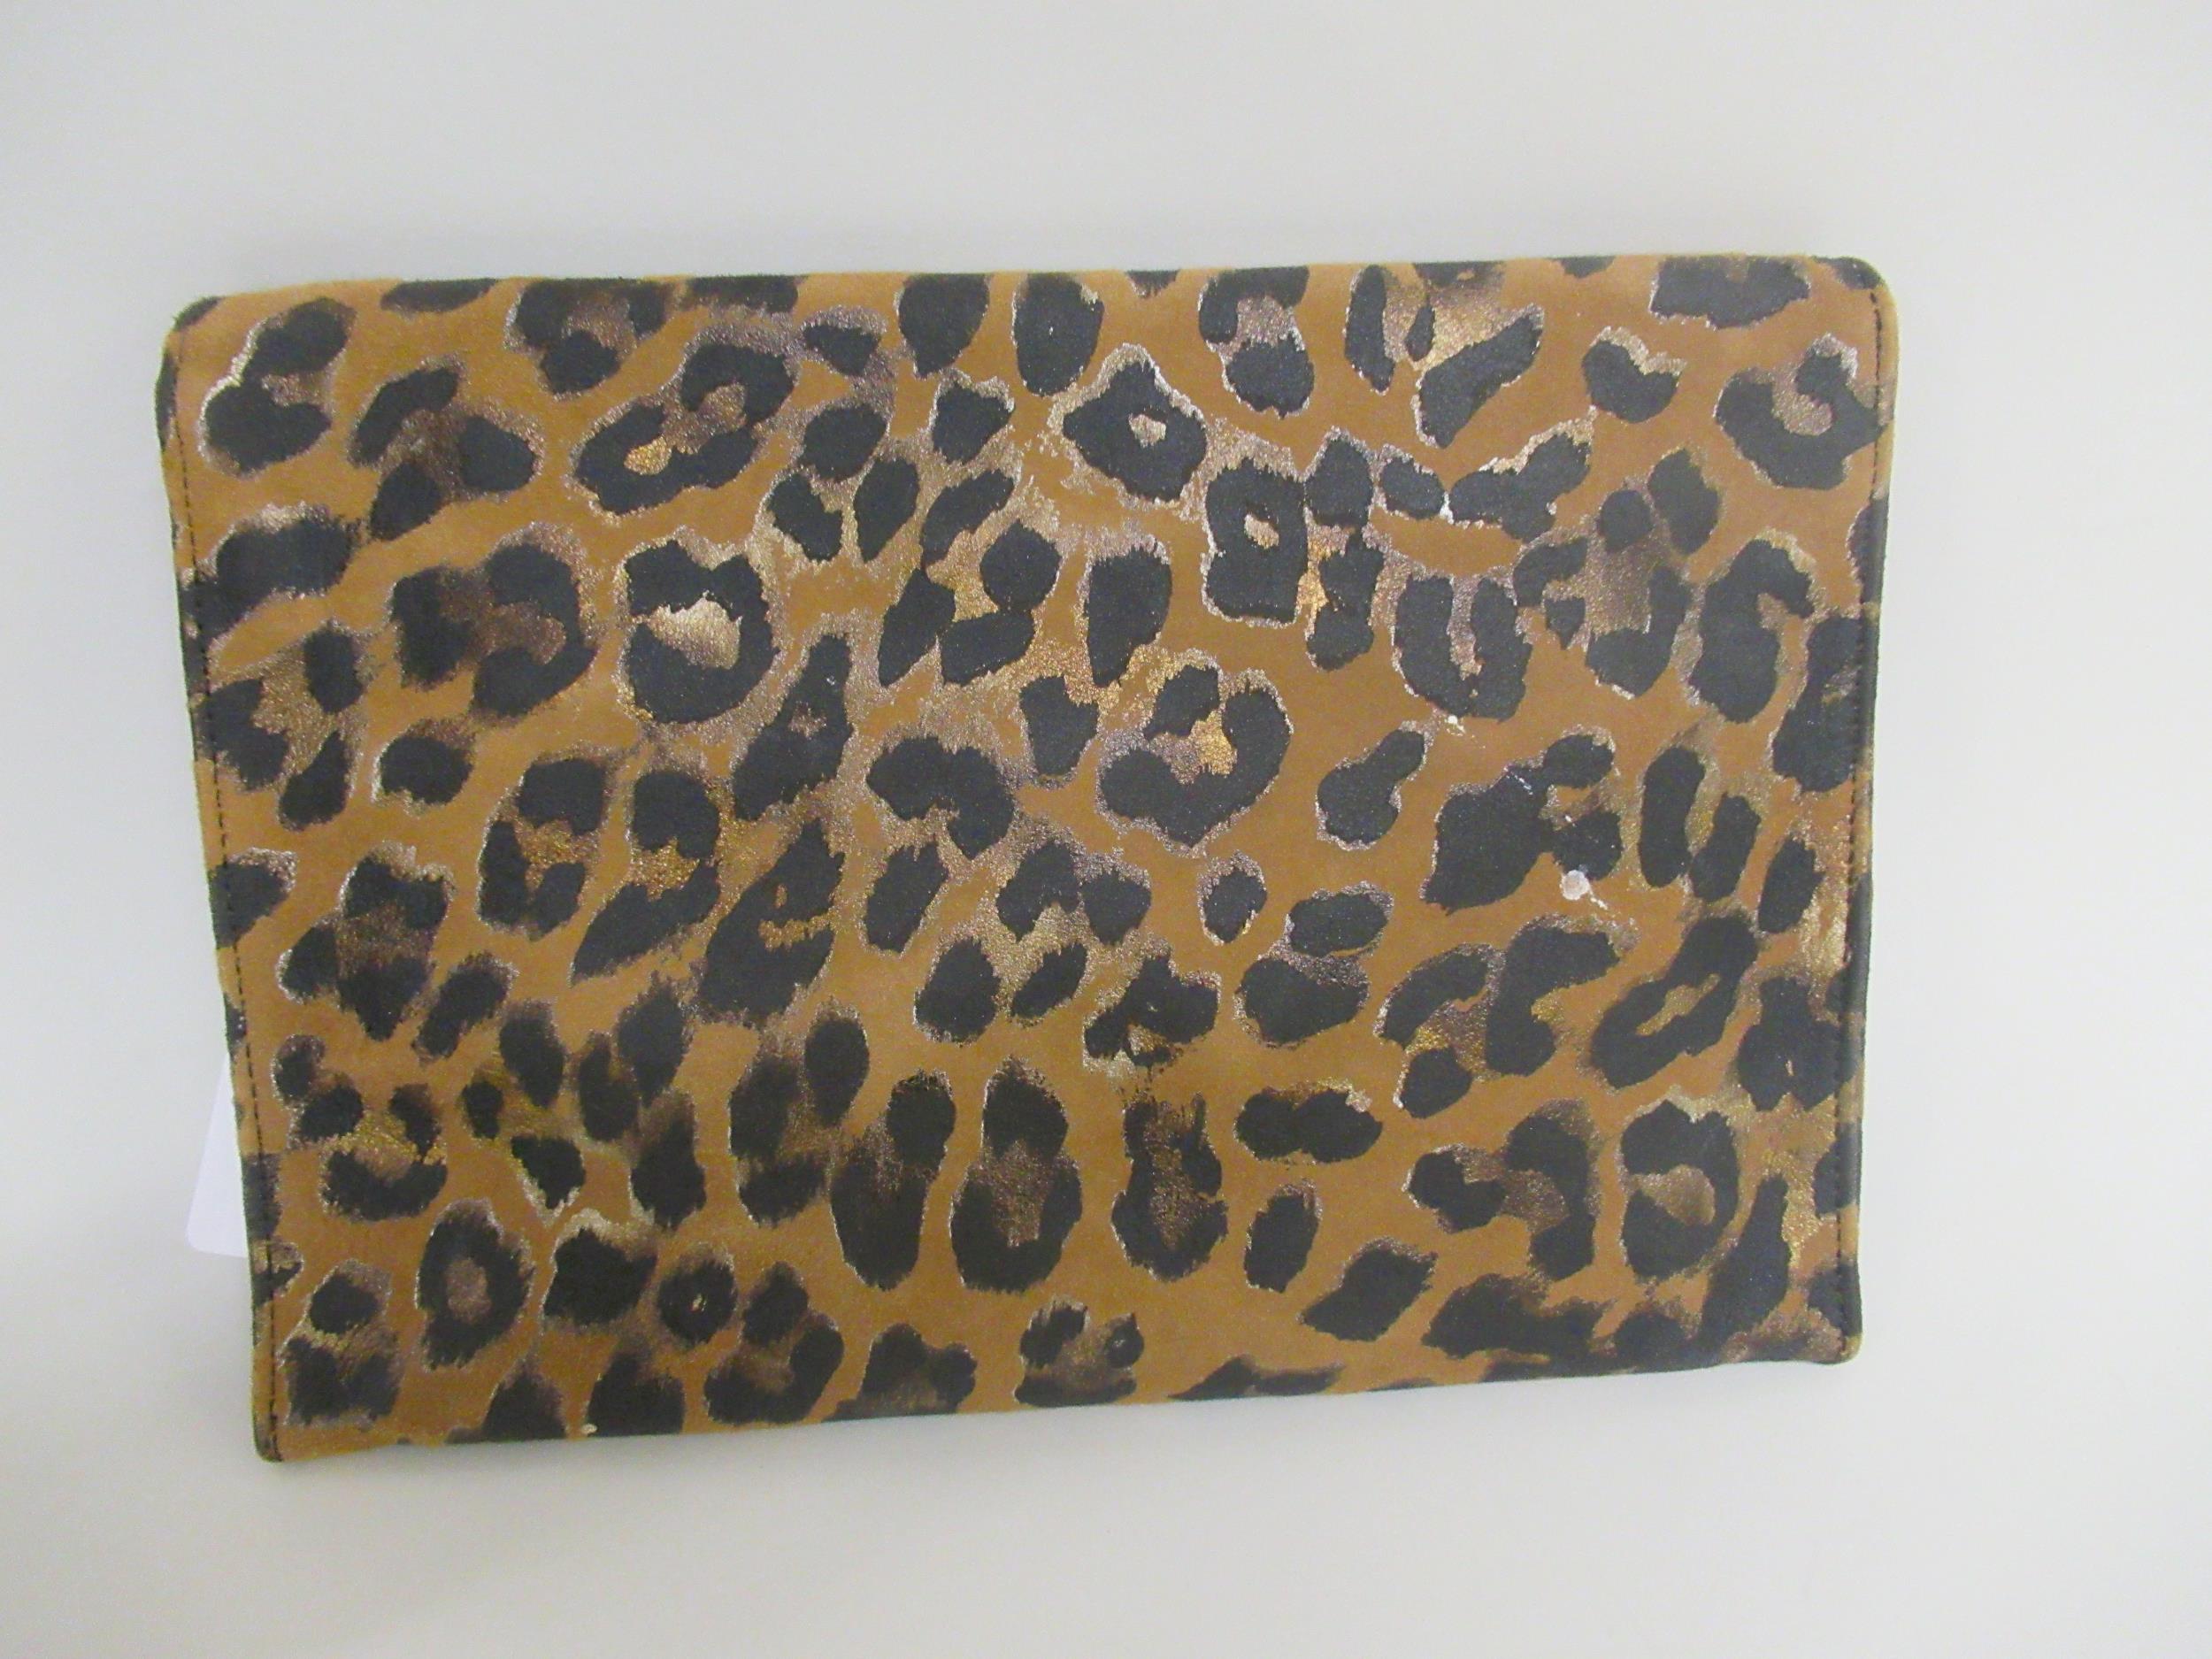 Jimmy Choo, leopard print suede envelope pouch bag with magnetic closure and detachable shoulder